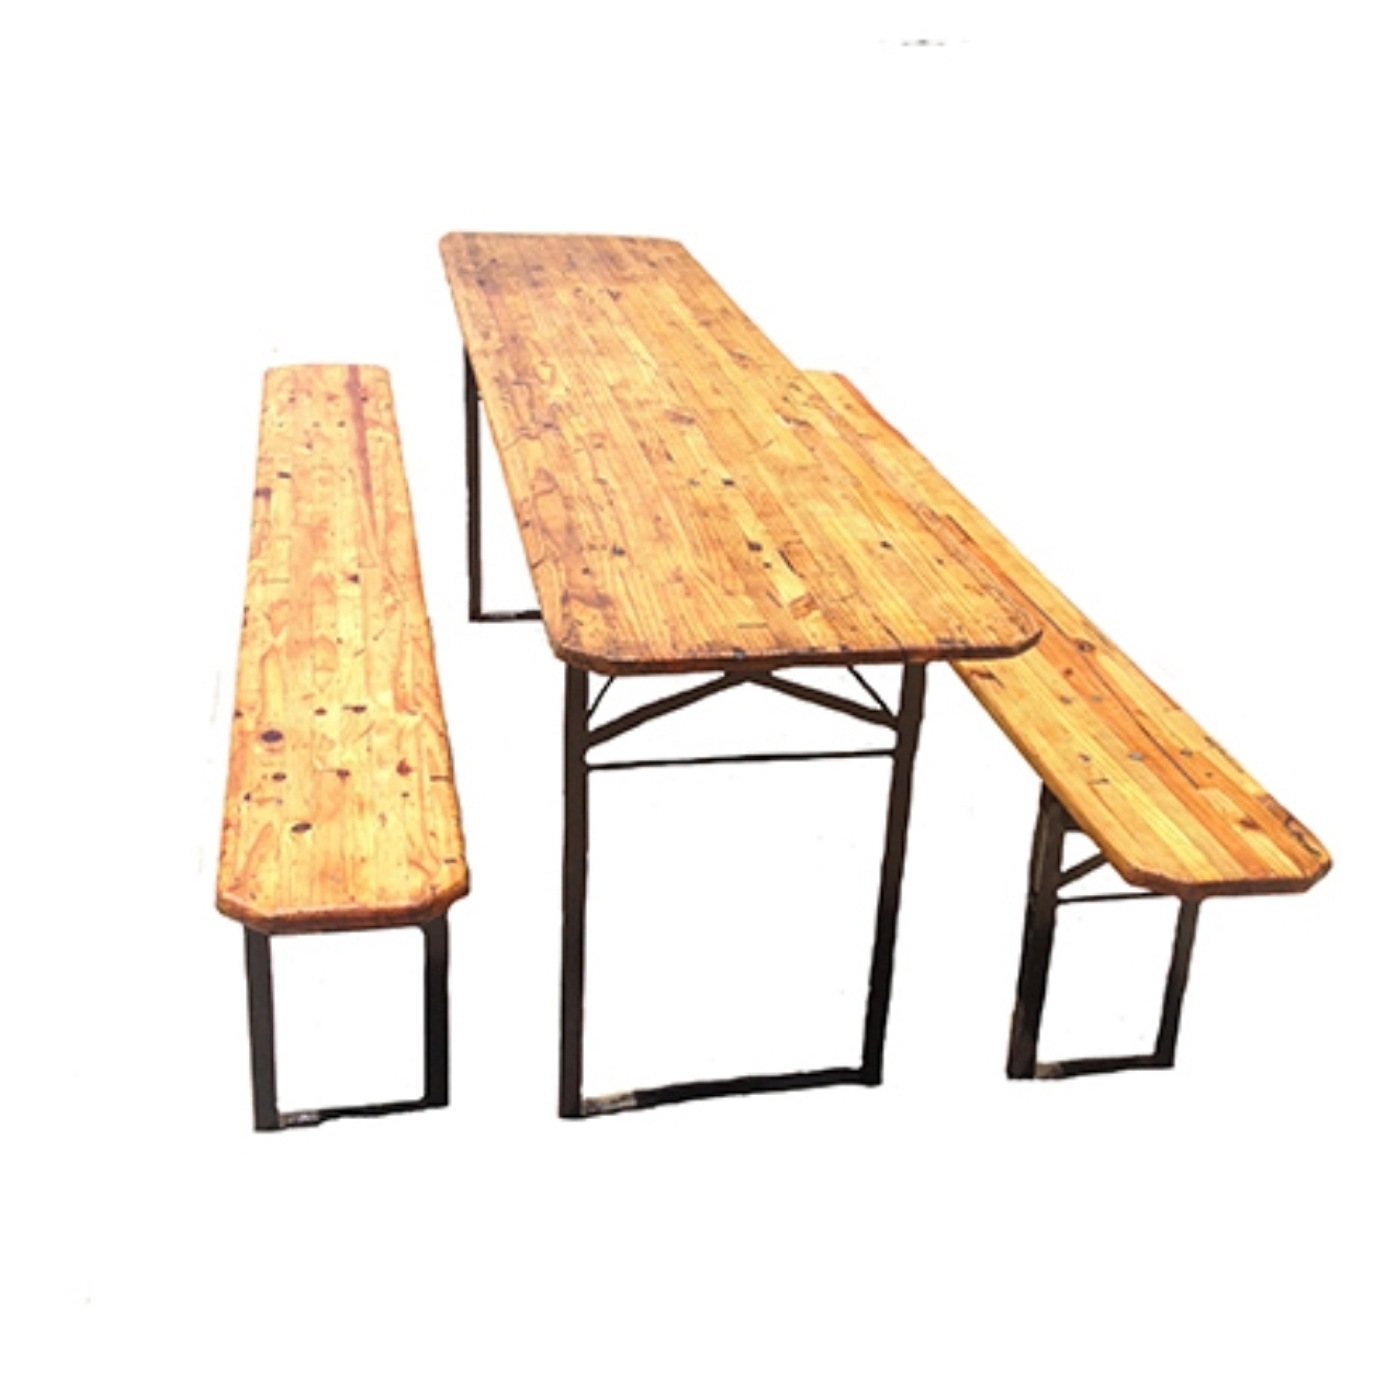 Wooden Beer Fest Table With Wooden Festival Benches.